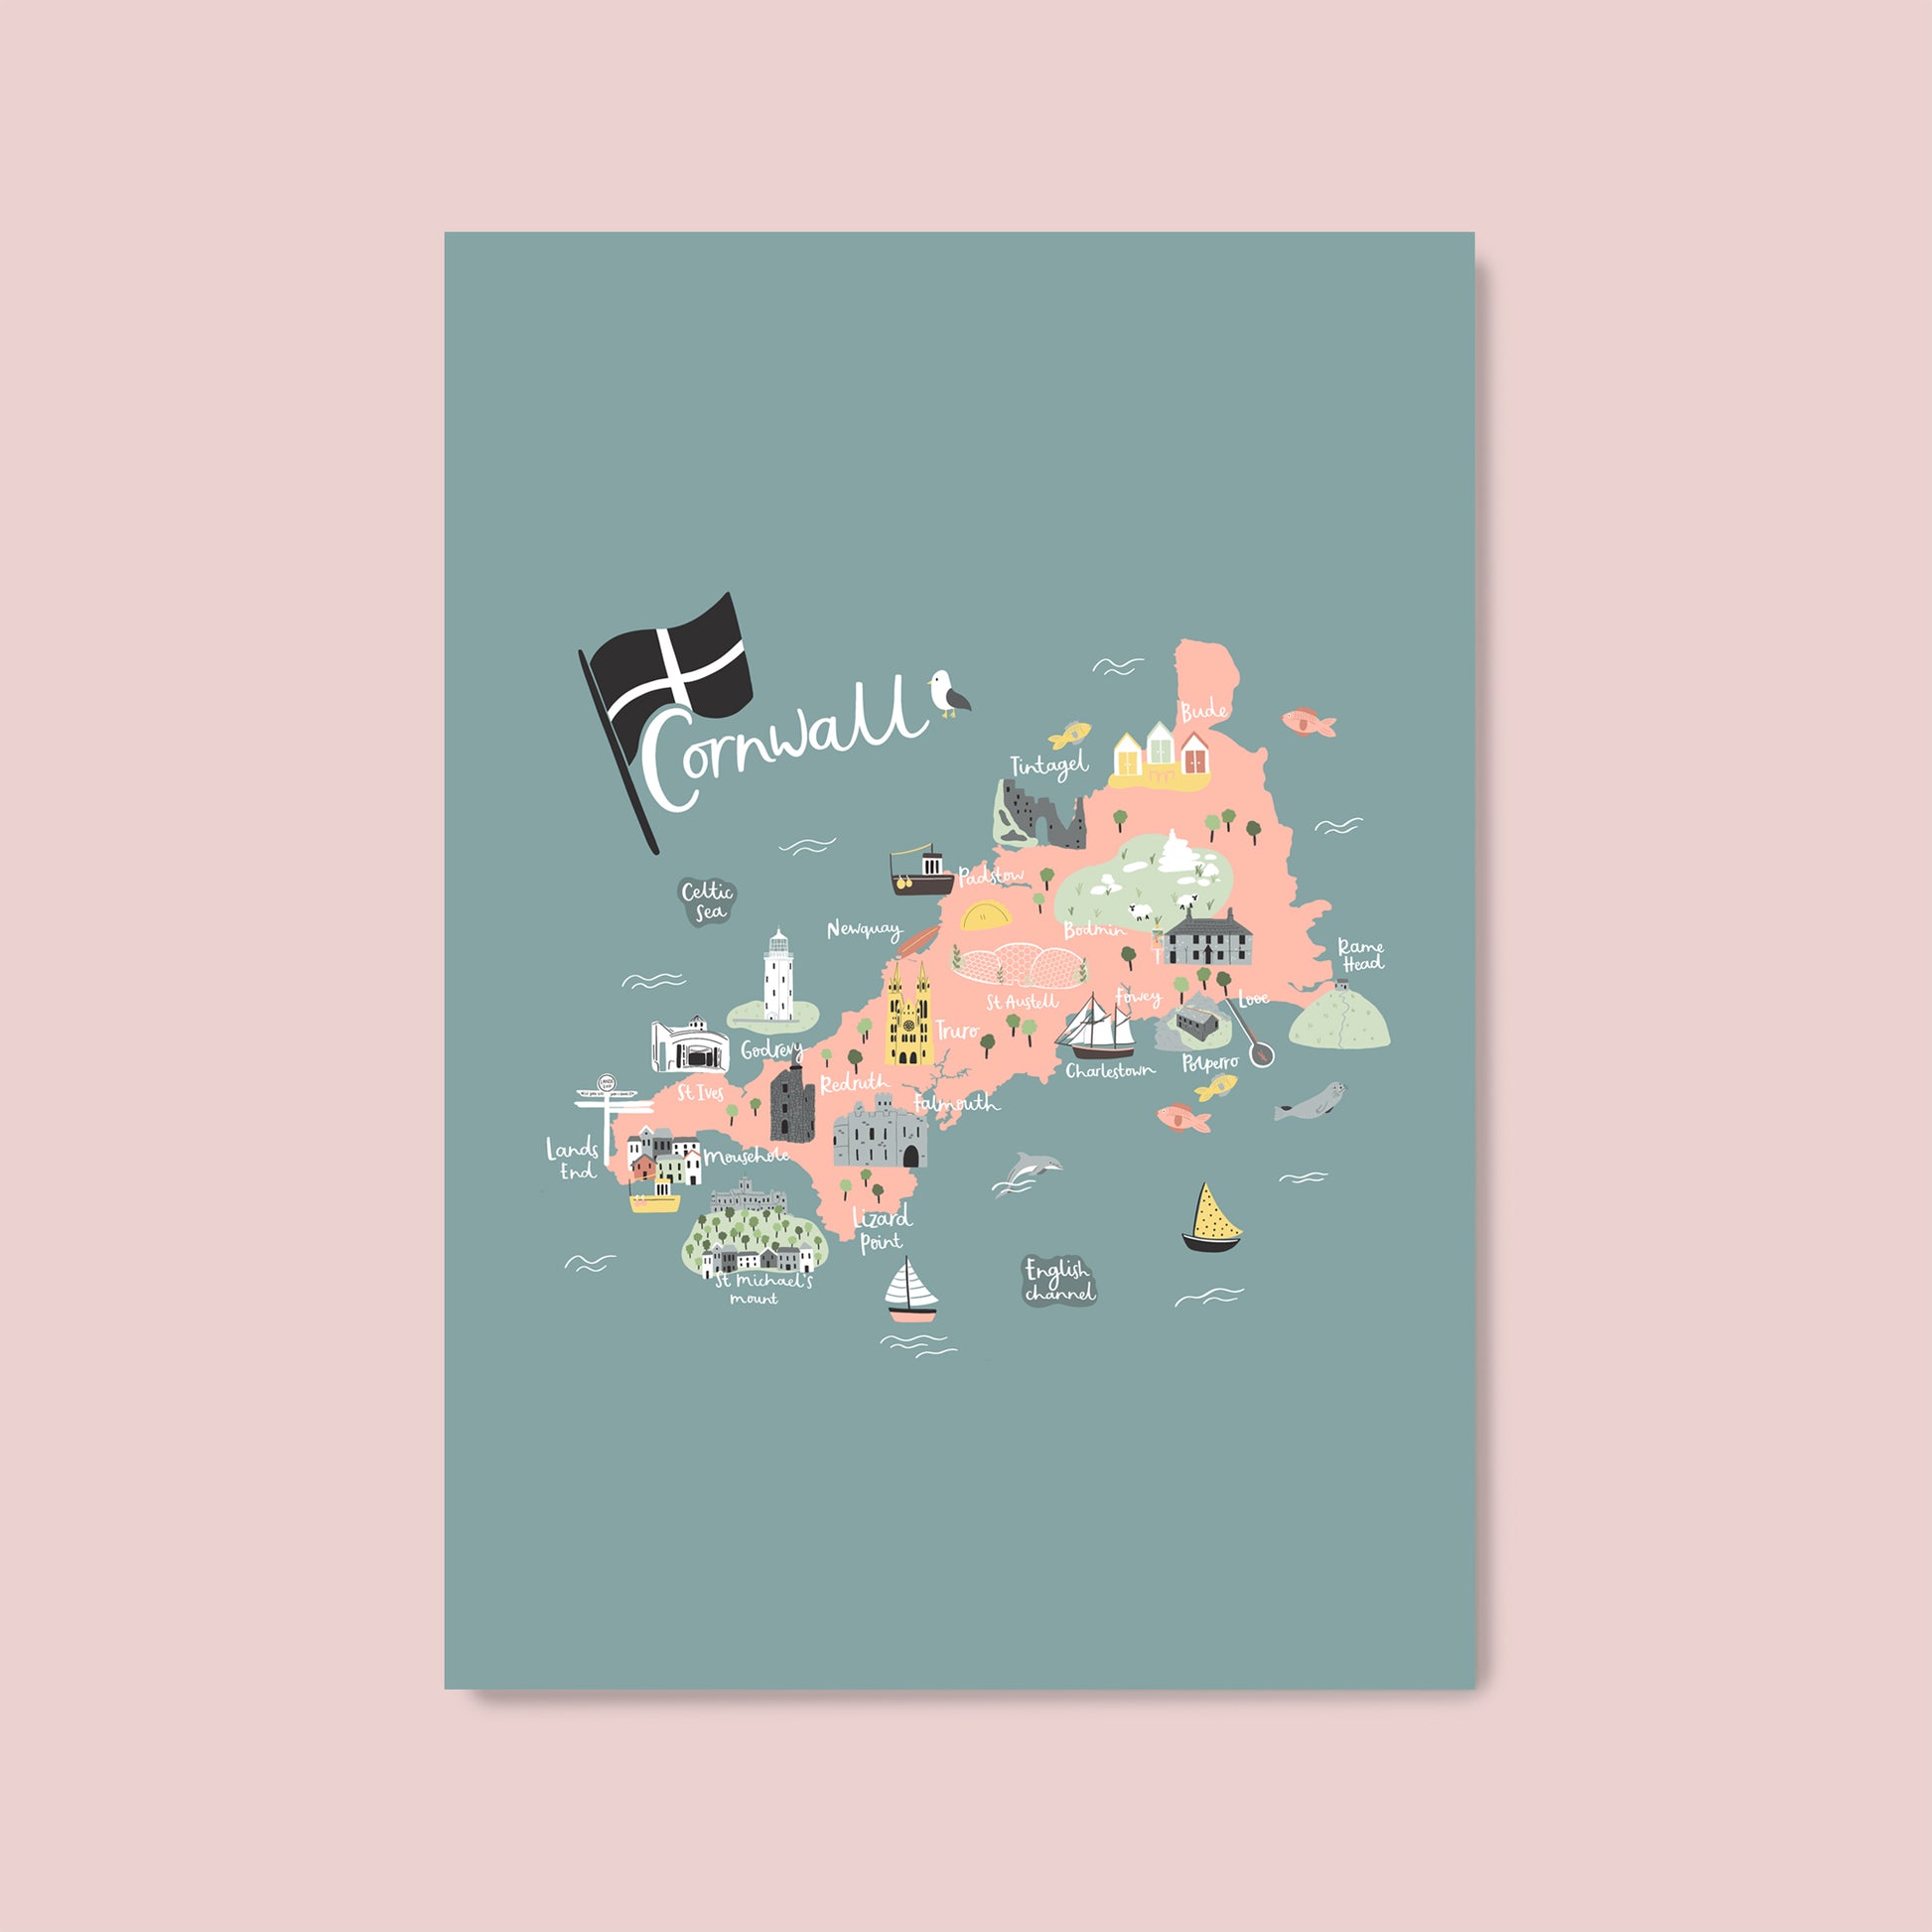 Cornwall Map Print illustrated by Abbie Imagine